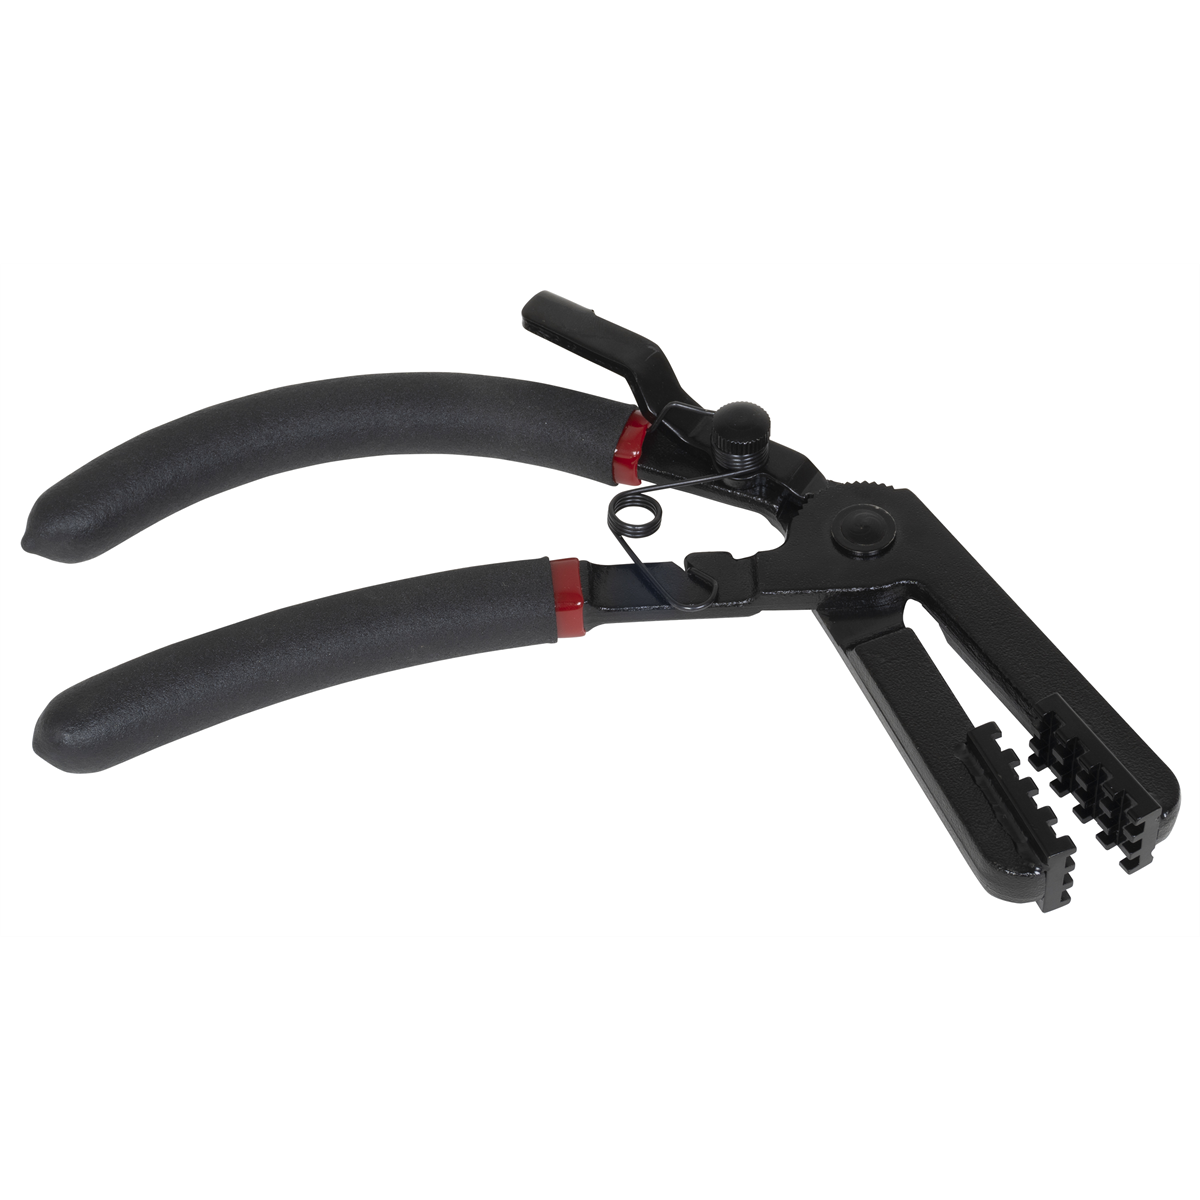 CURVED HOSE CLAMP PLIERS